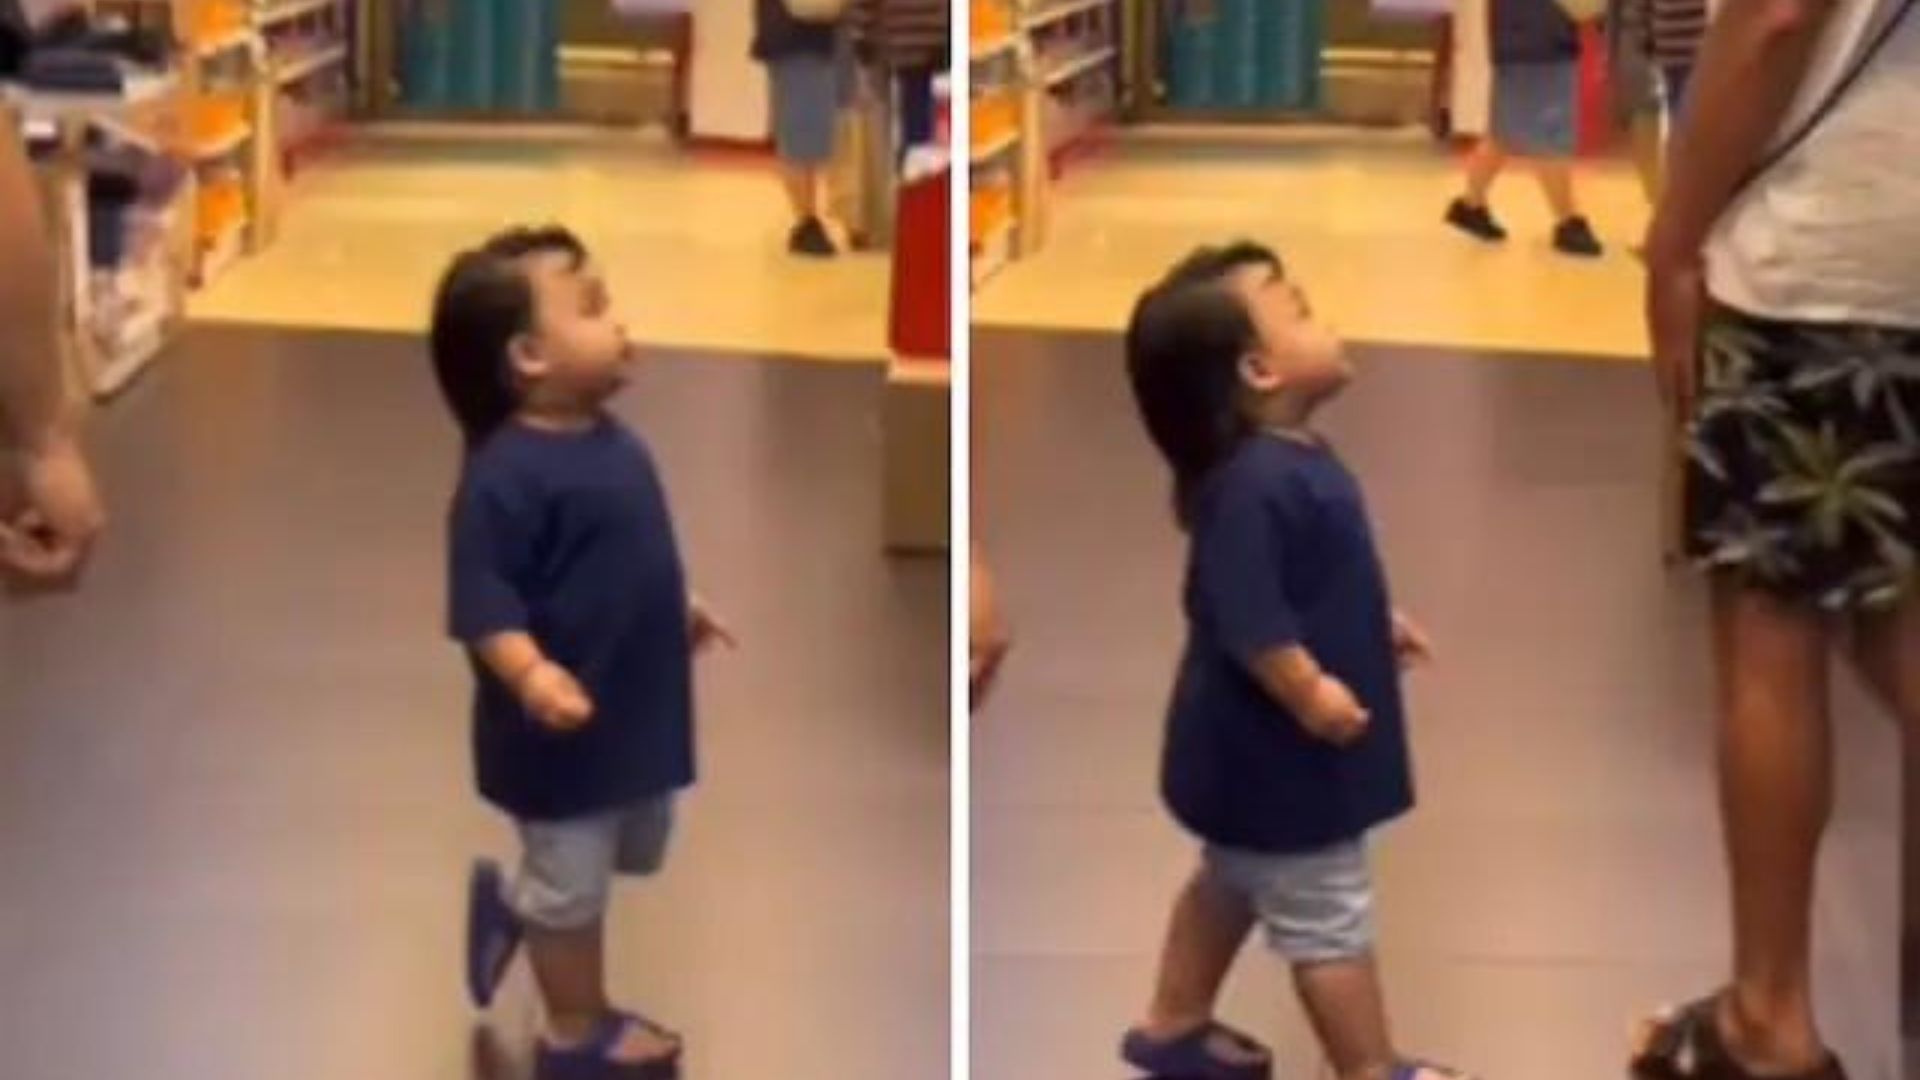 Pure Innocence: Little Boy’s Hilarious Mistake As He Confuses Man for ‘Jesus’ In Viral Video